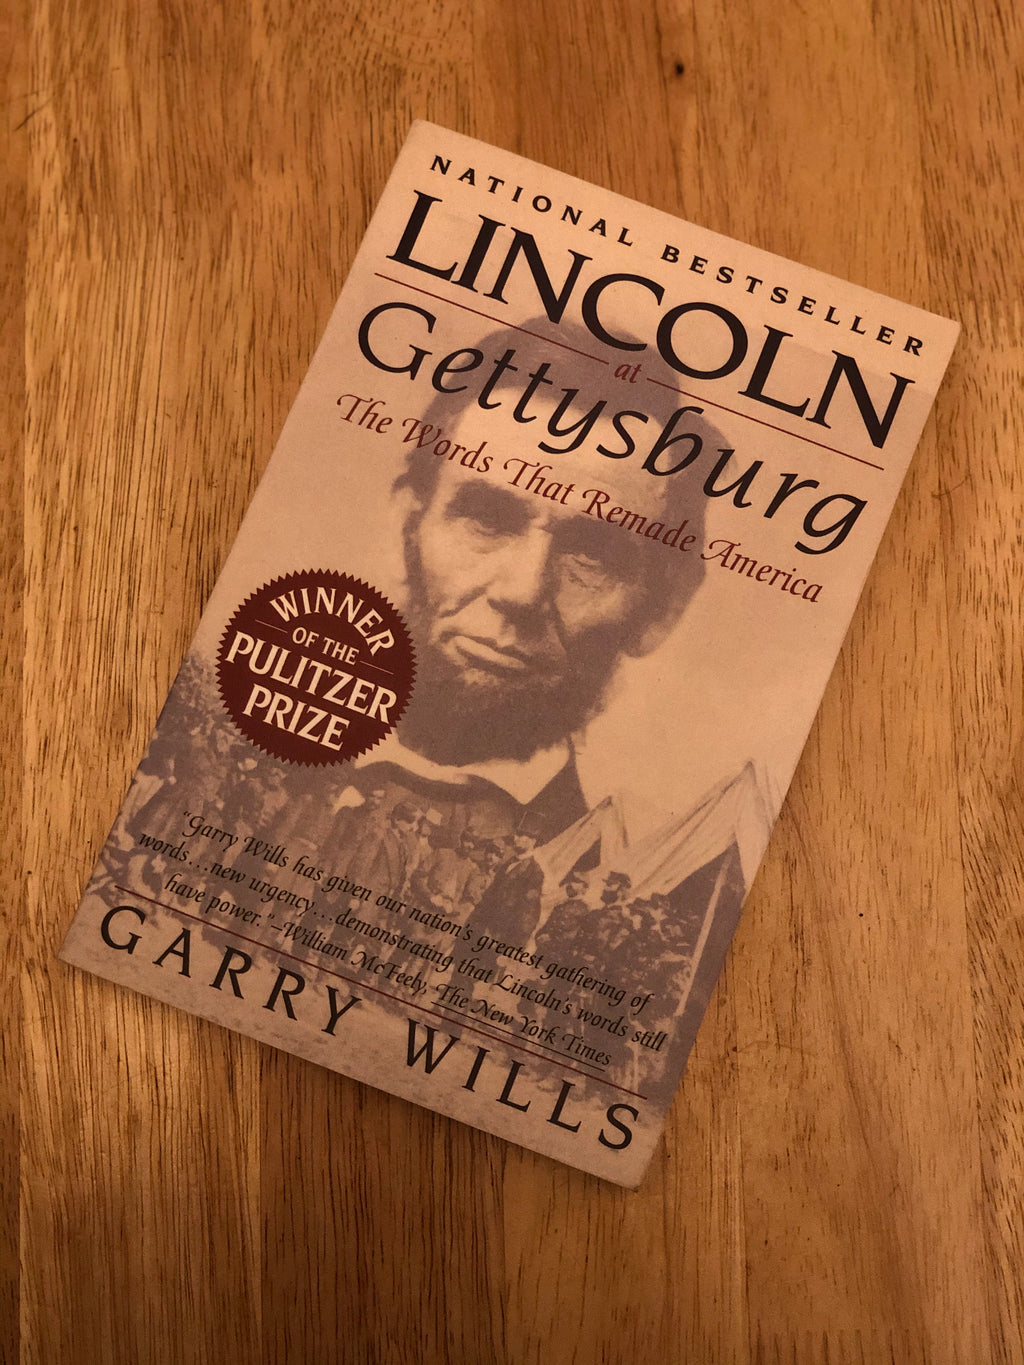 Lincoln at Gettysburg- By Garry Wills